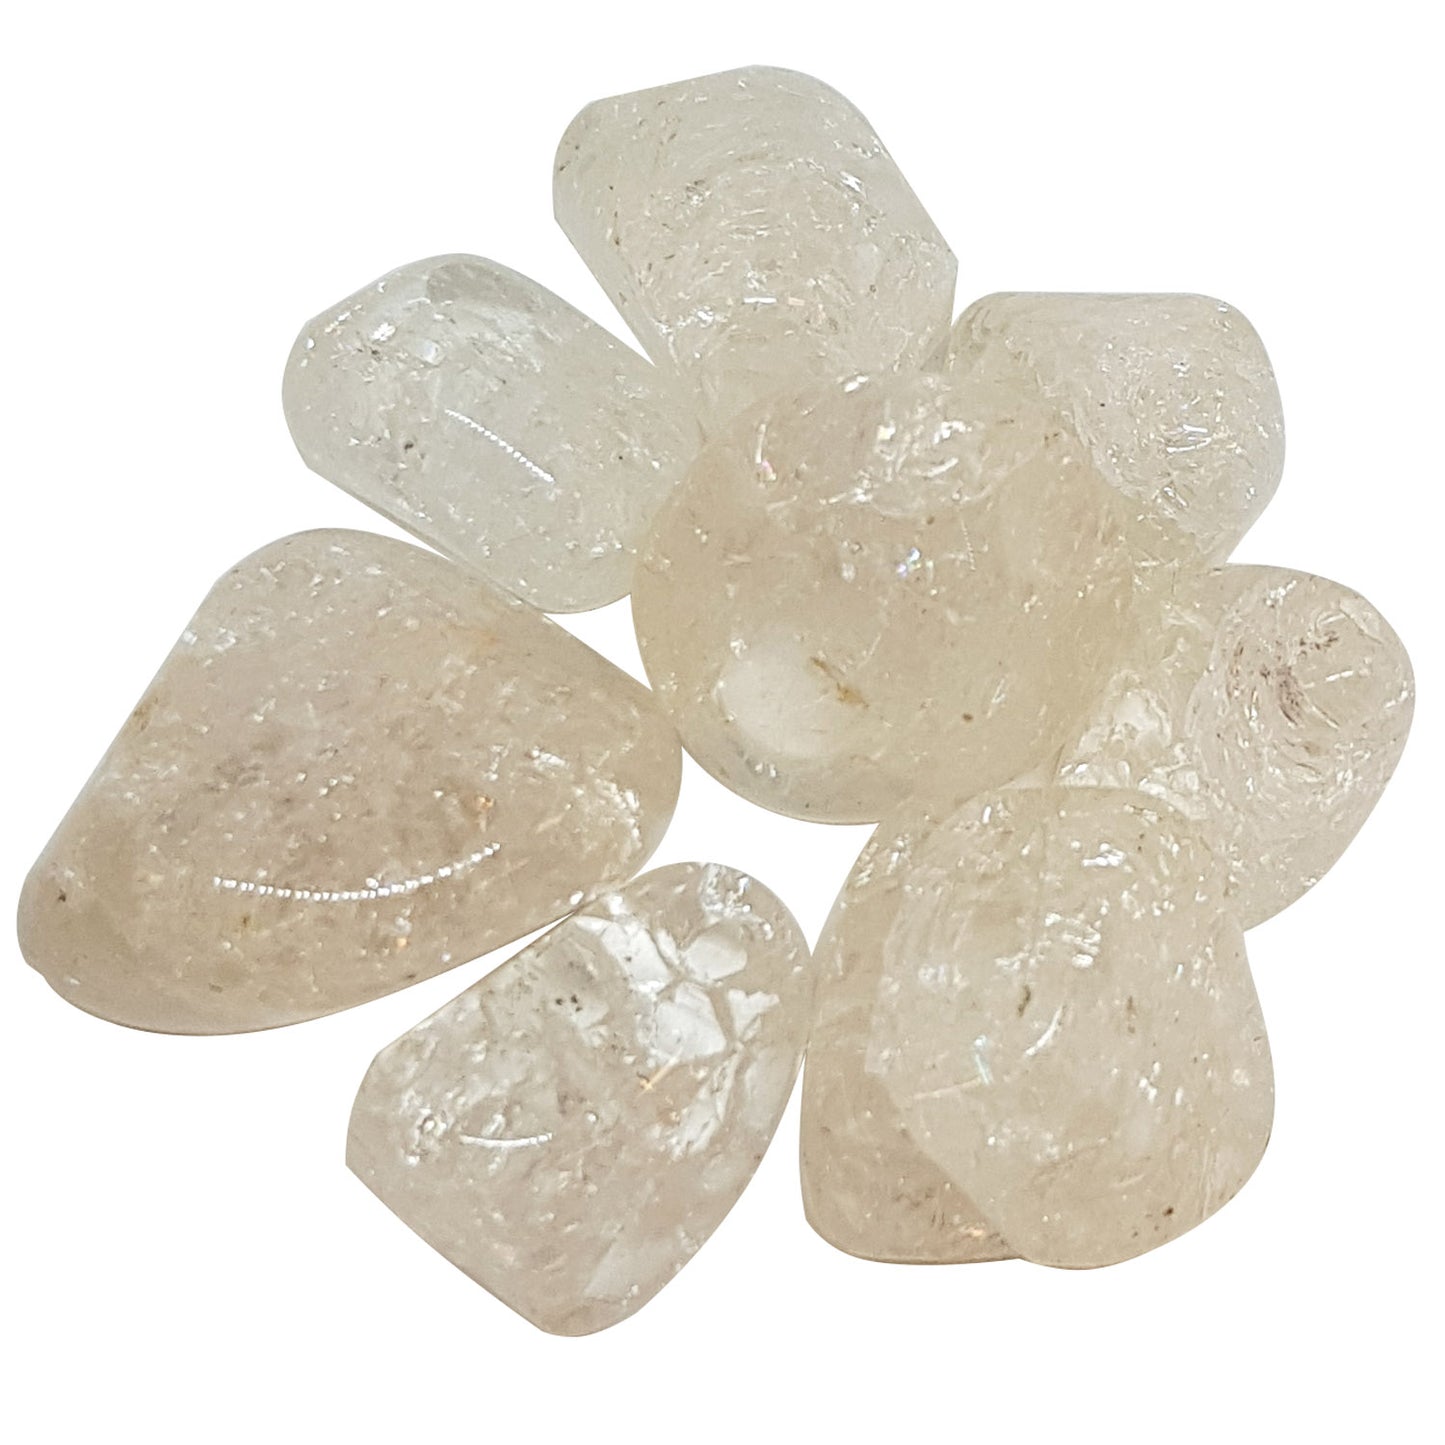 TUMBLE STONES - Crystal Cracked per 100gms